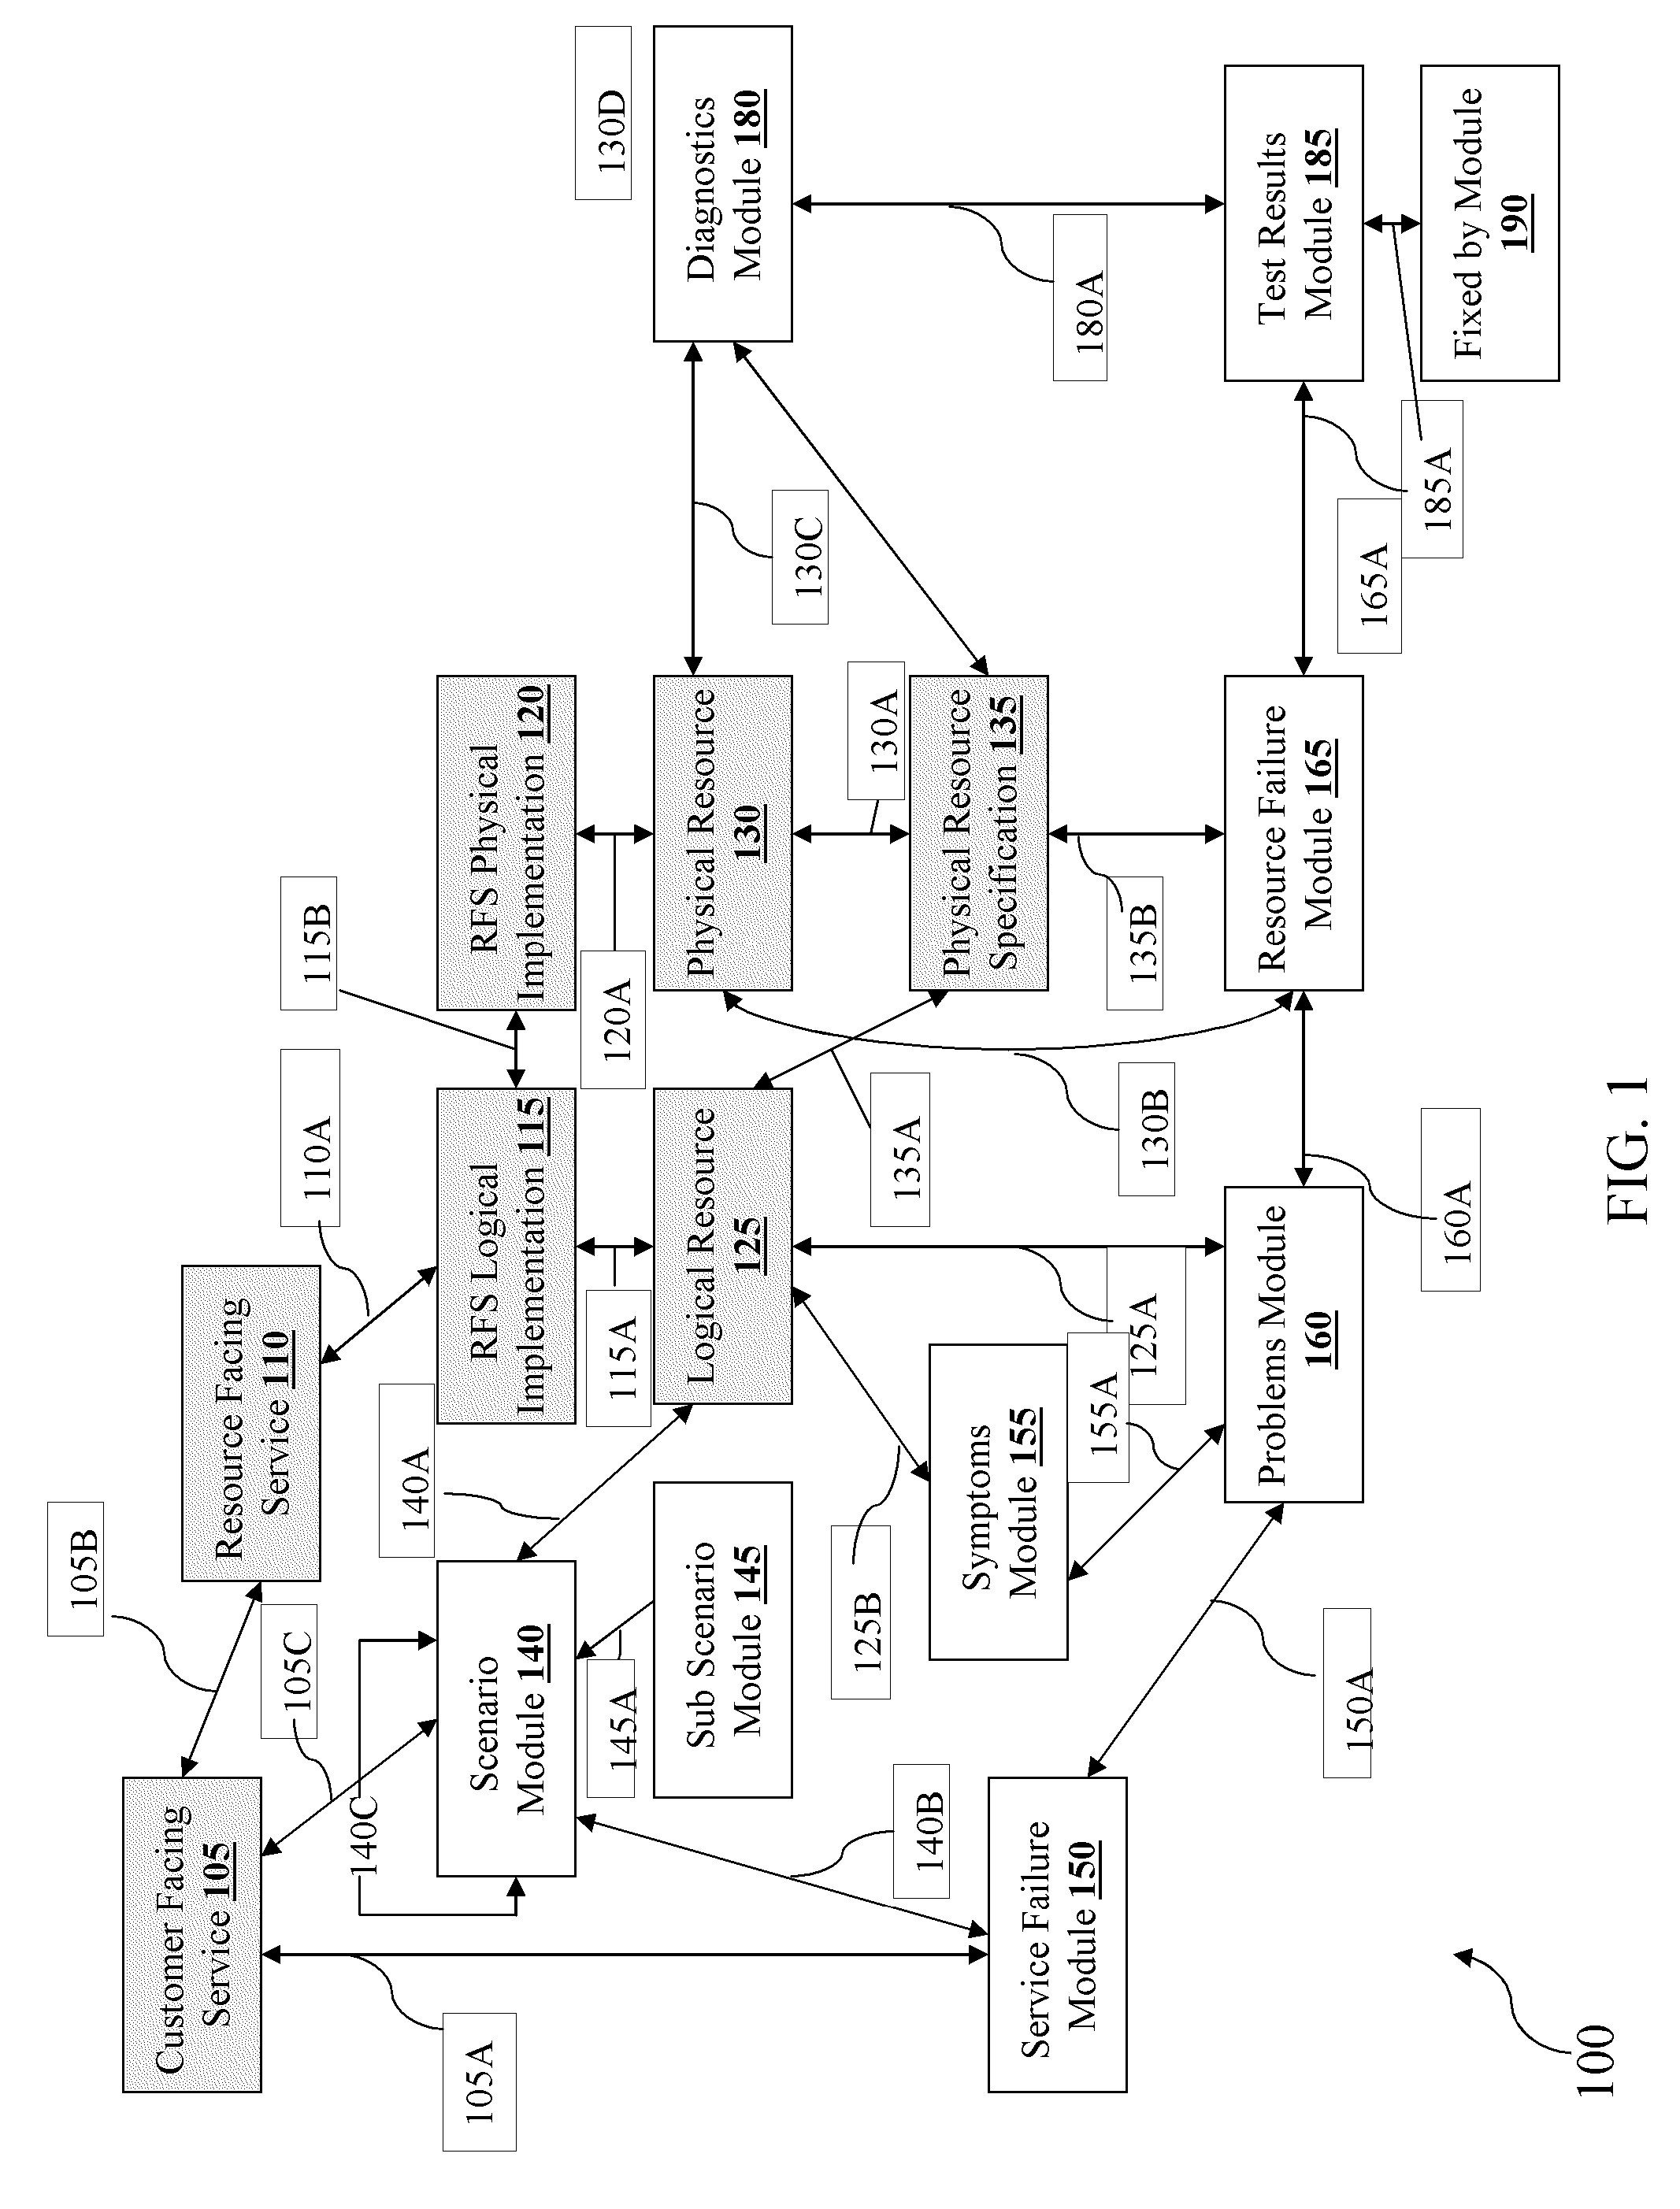 Model driven diagnostics system and methods thereof